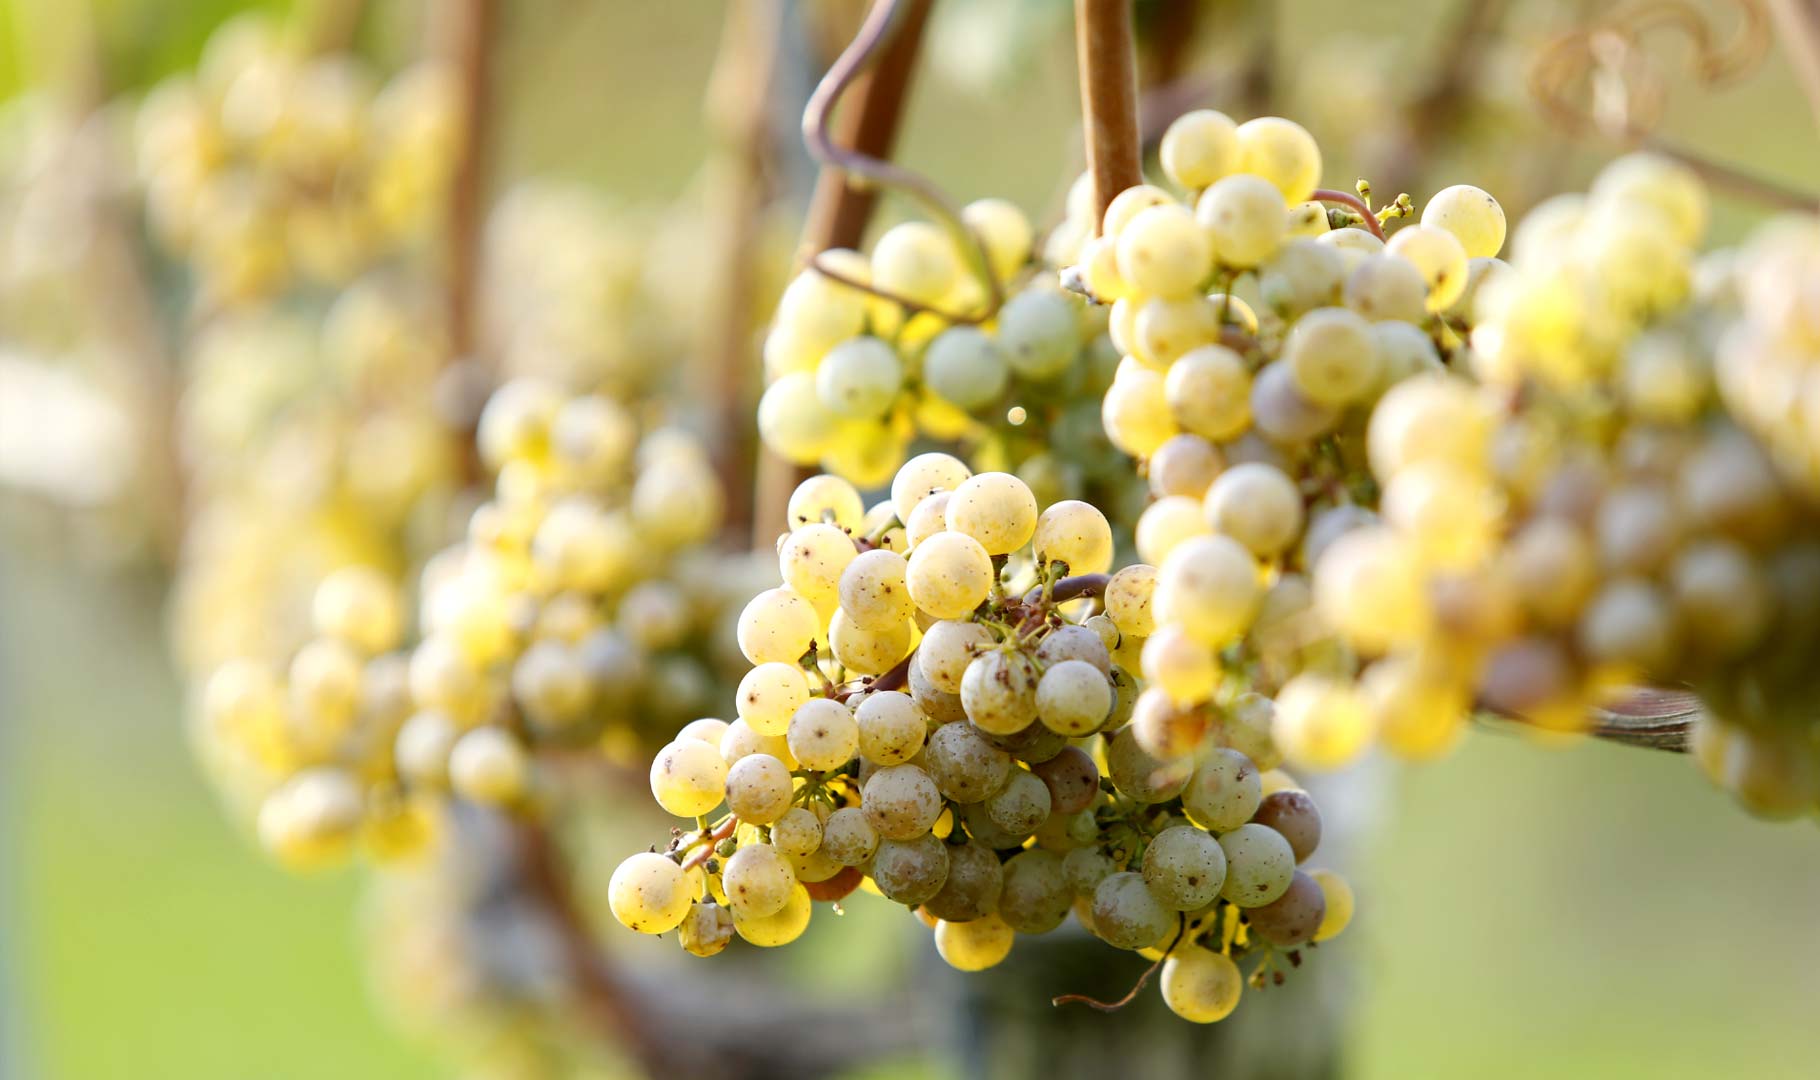 Grapevine with white grapes